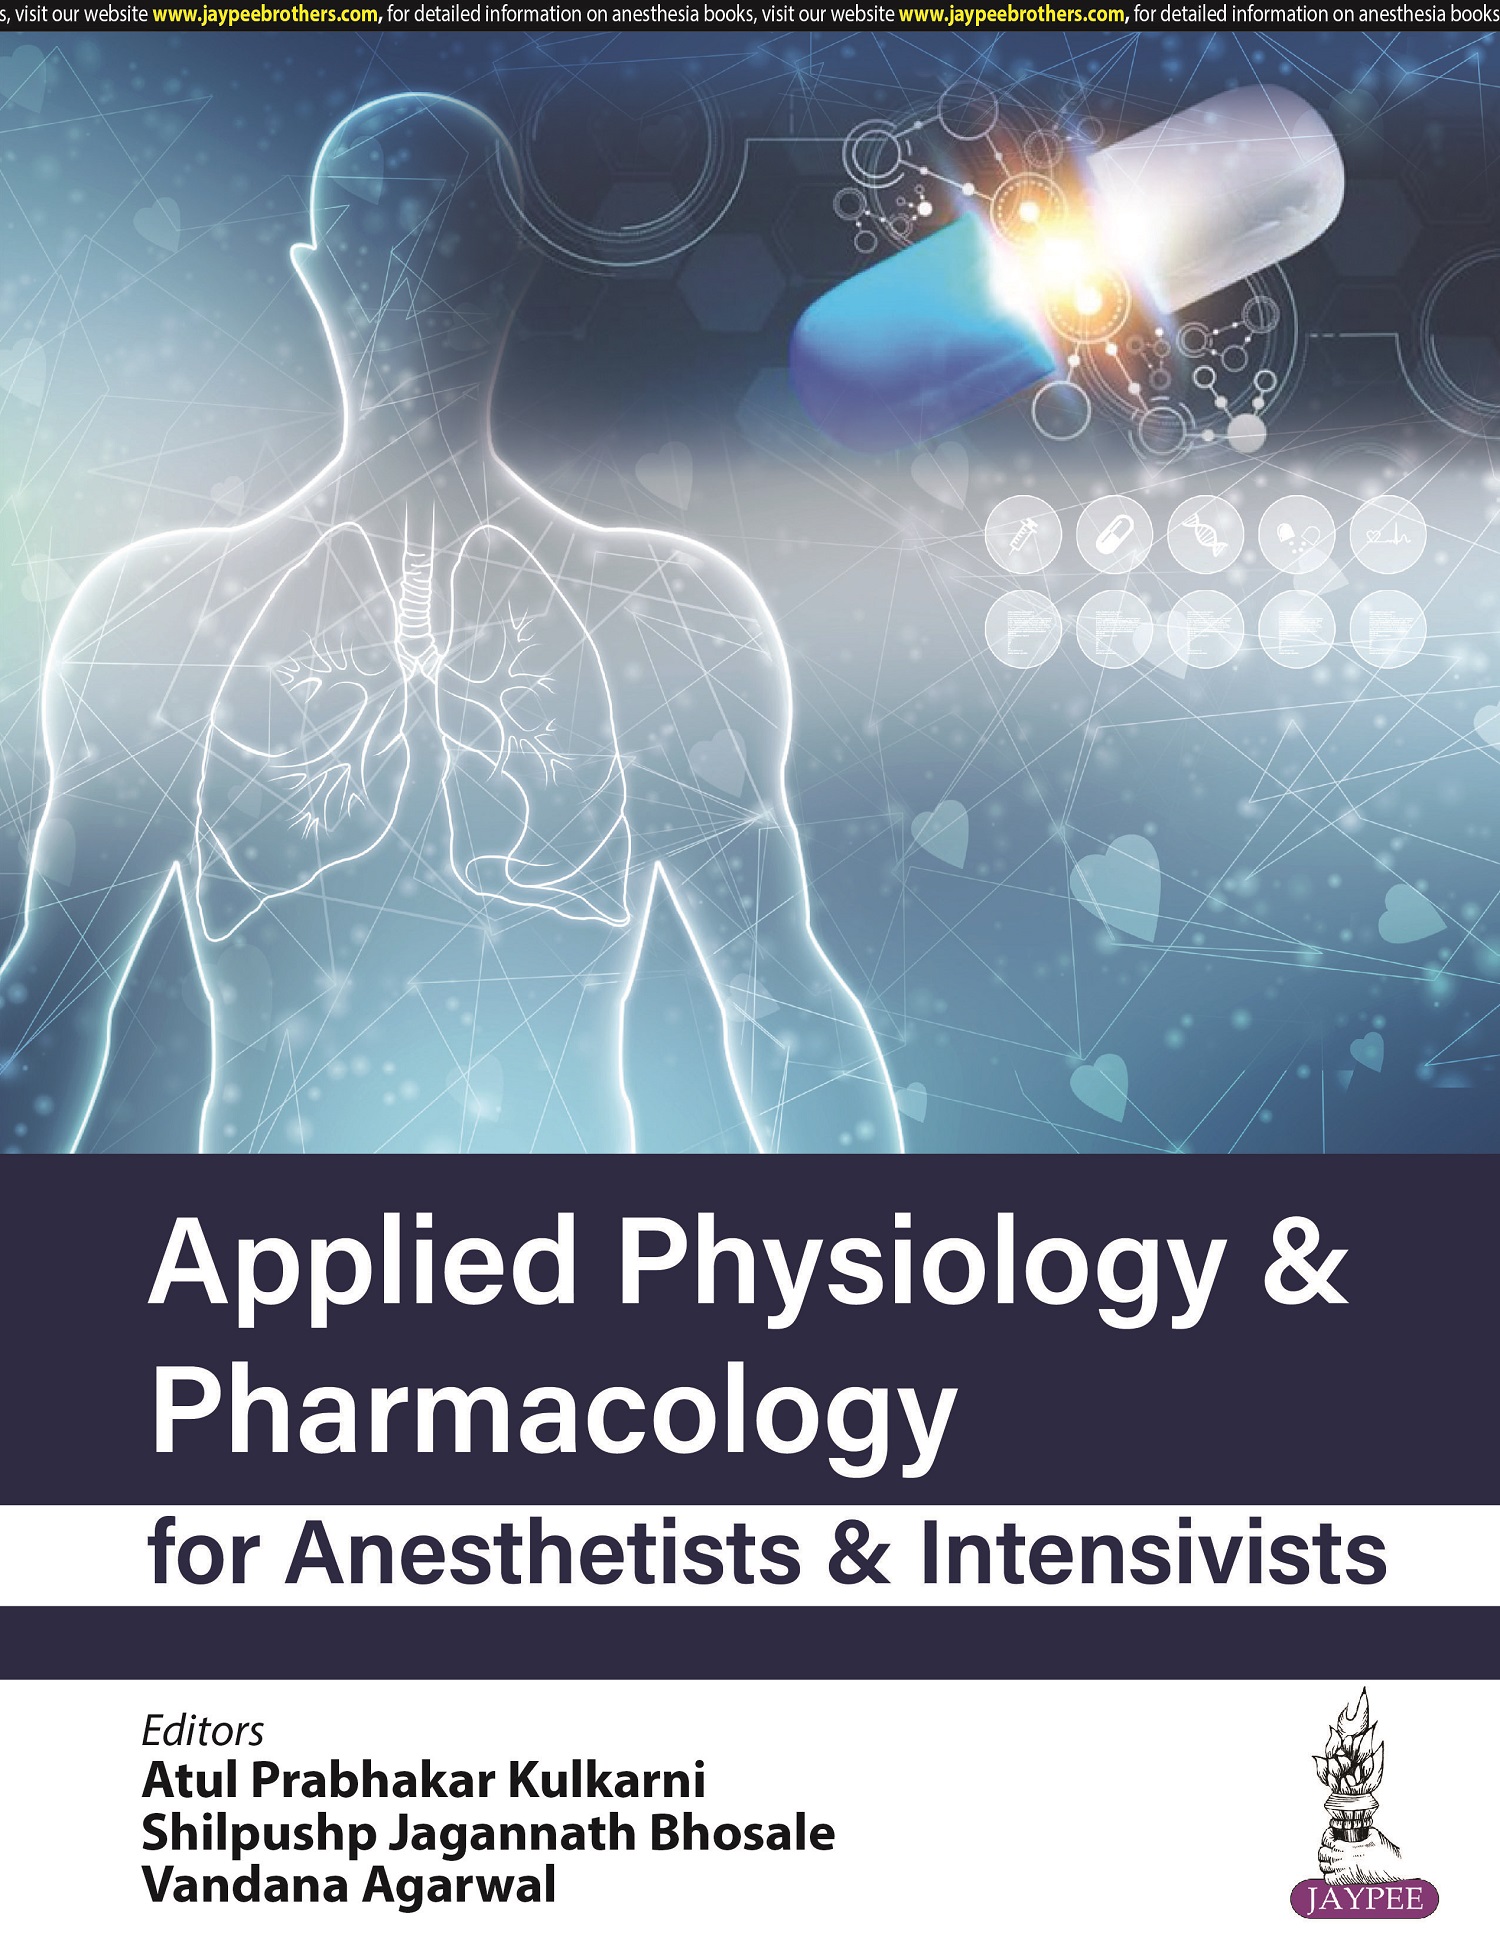 Applied Physiology & Pharmacology for Anesthetists & Intensivists